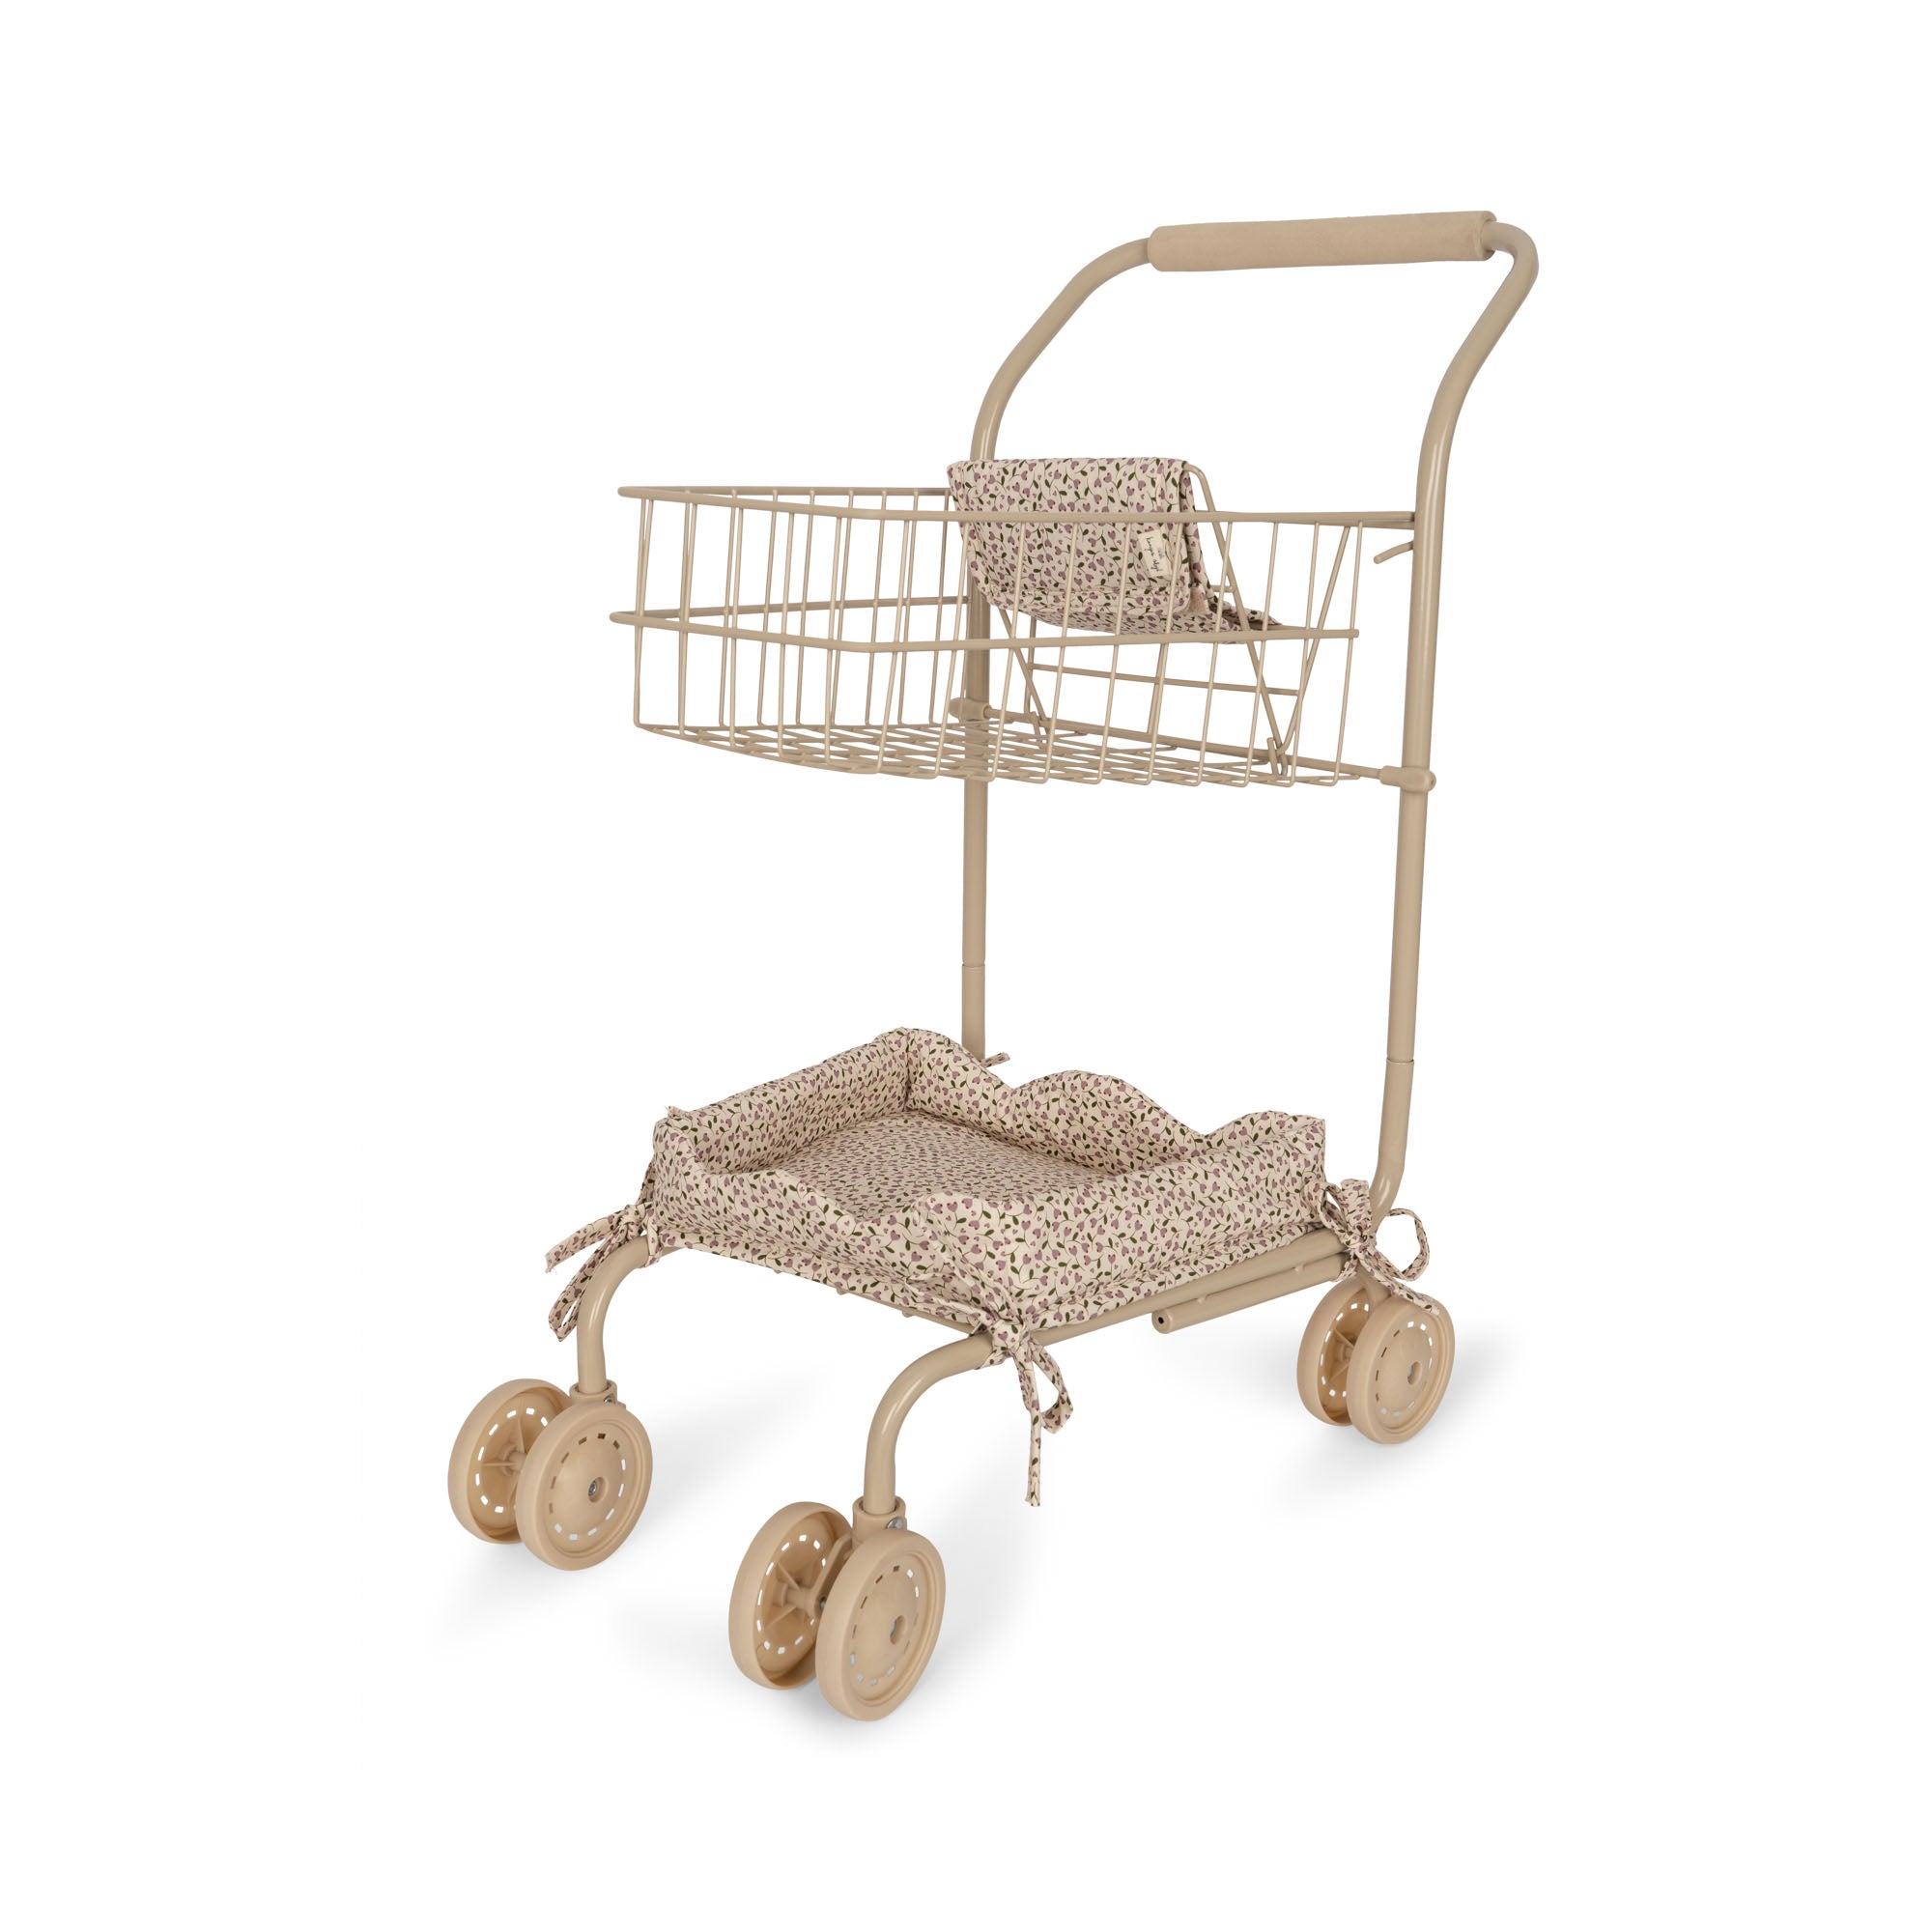 Konges Slojd Kids Shopping Cart with Doll Seat: Perfect toy for imaginative play, sturdy design for kids.